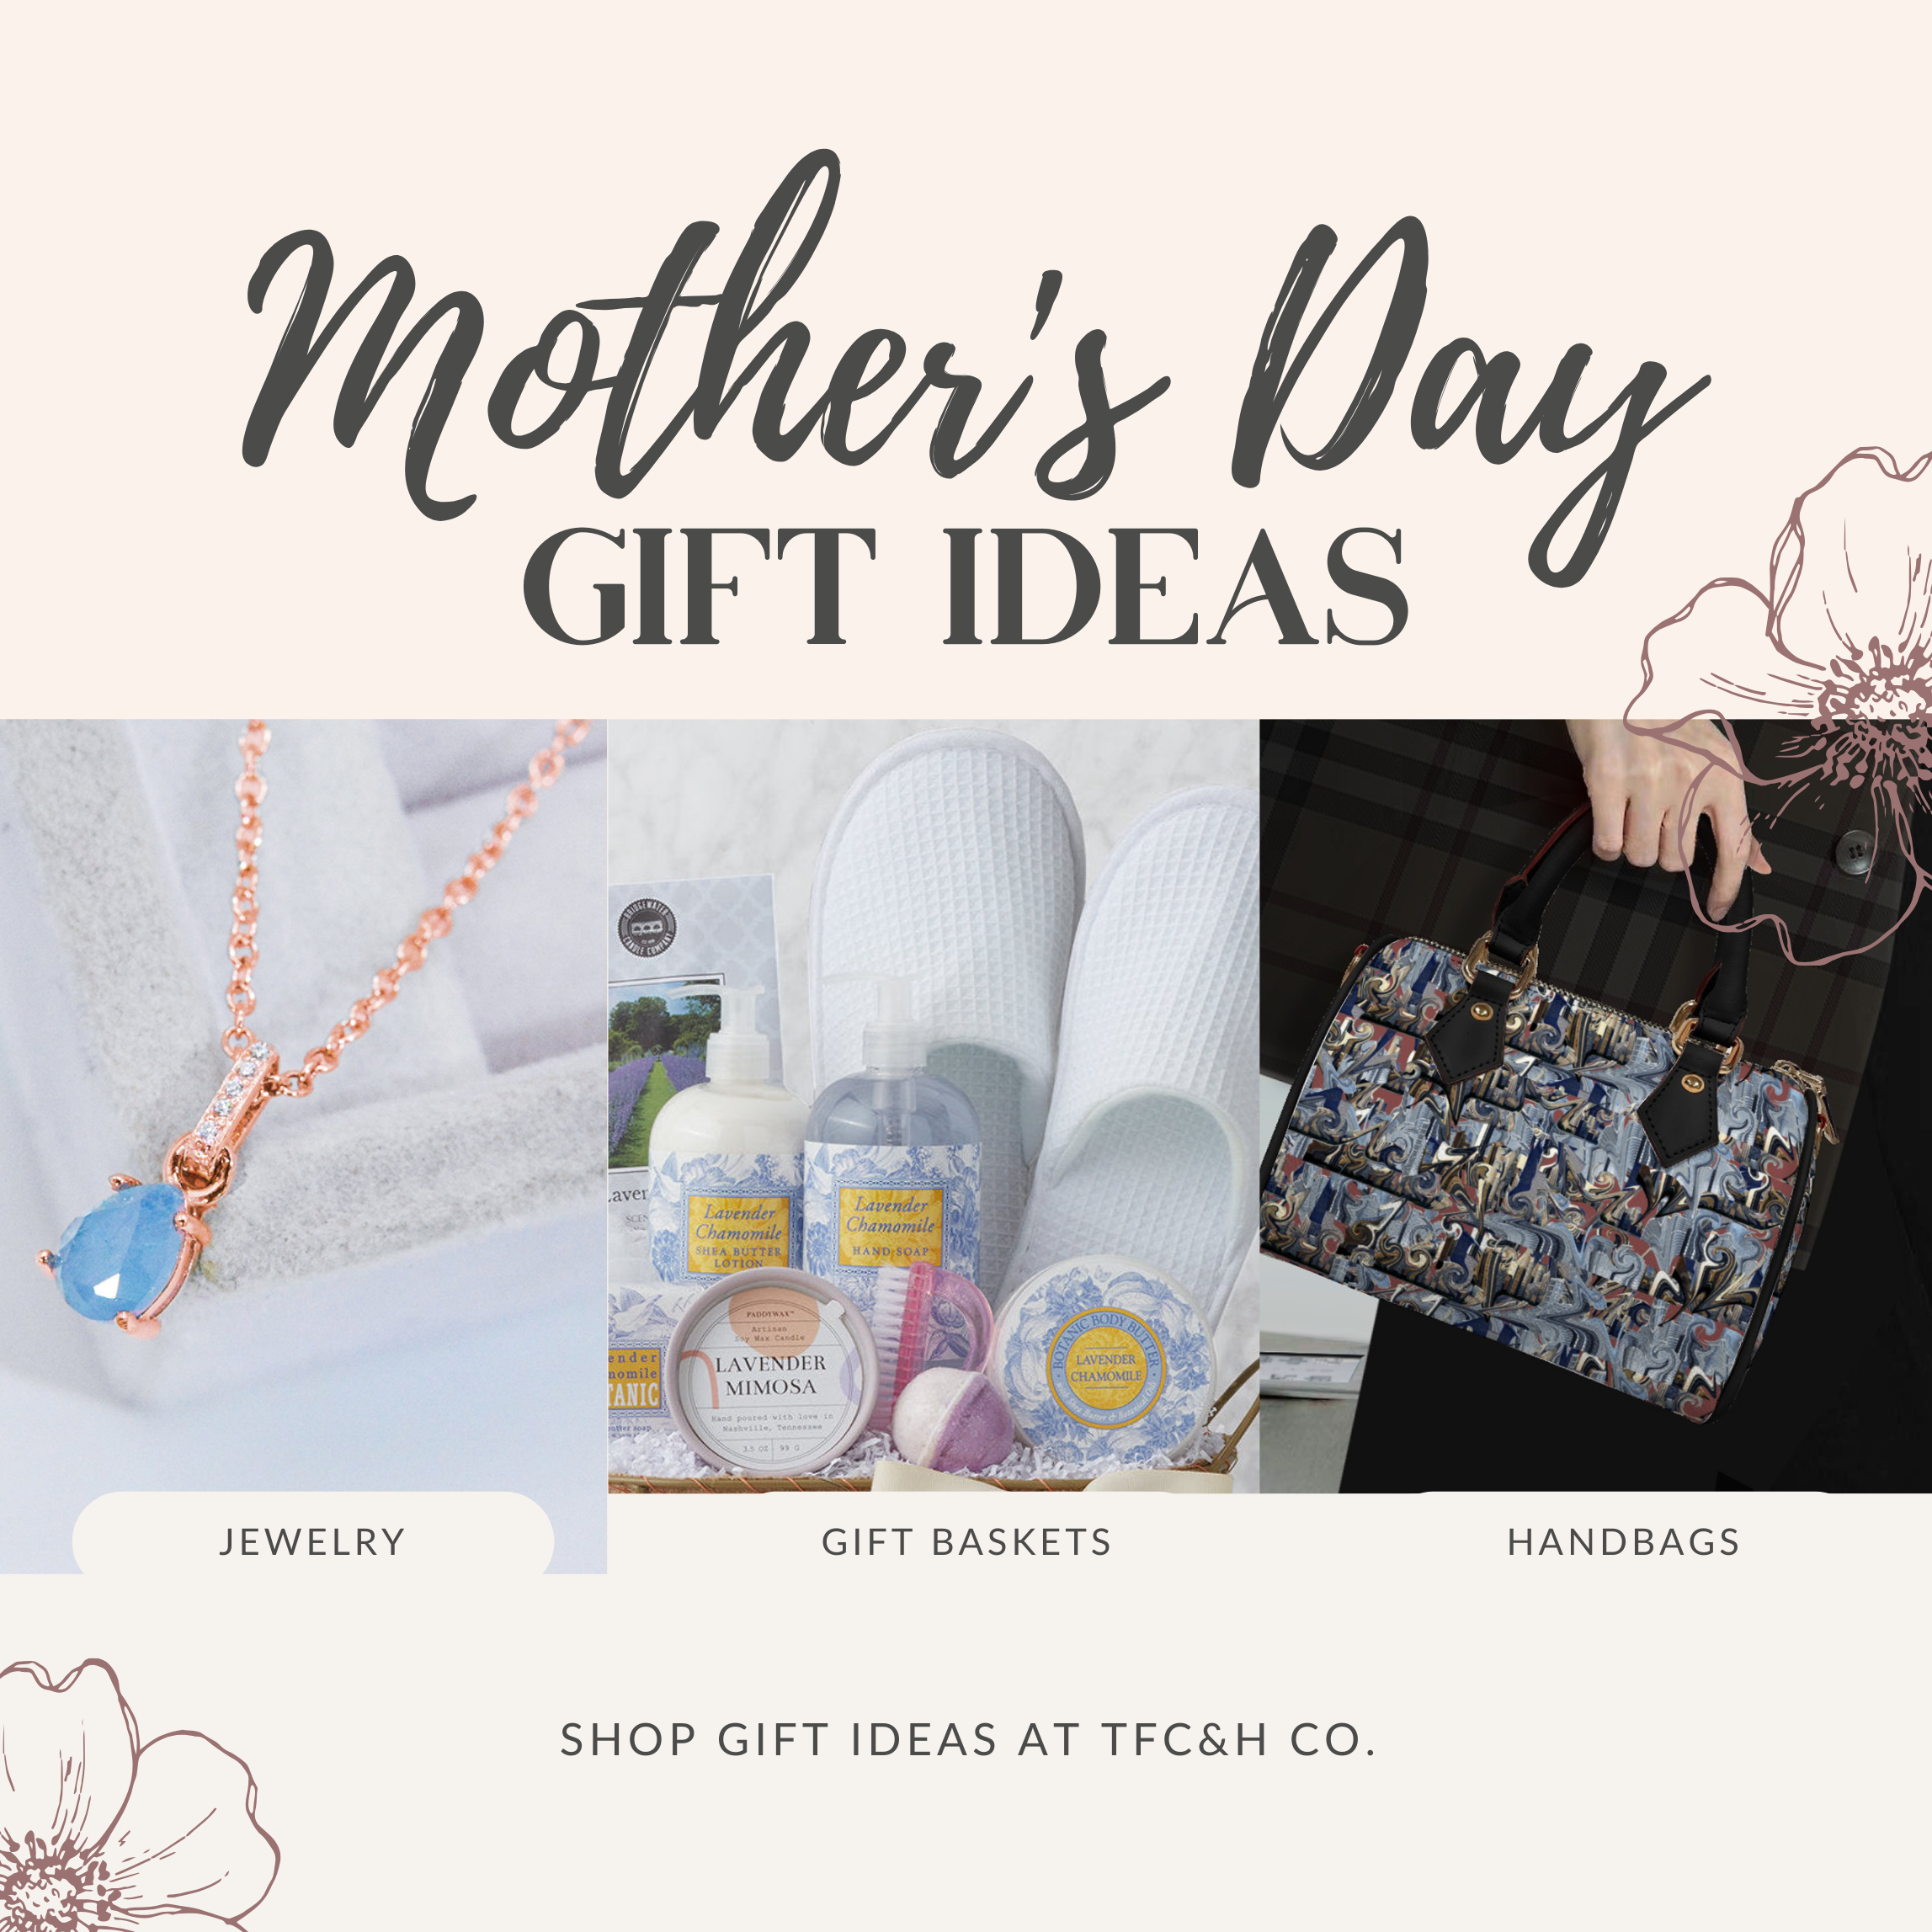 Mother's Day Gift Ideas at TFC&H Co.